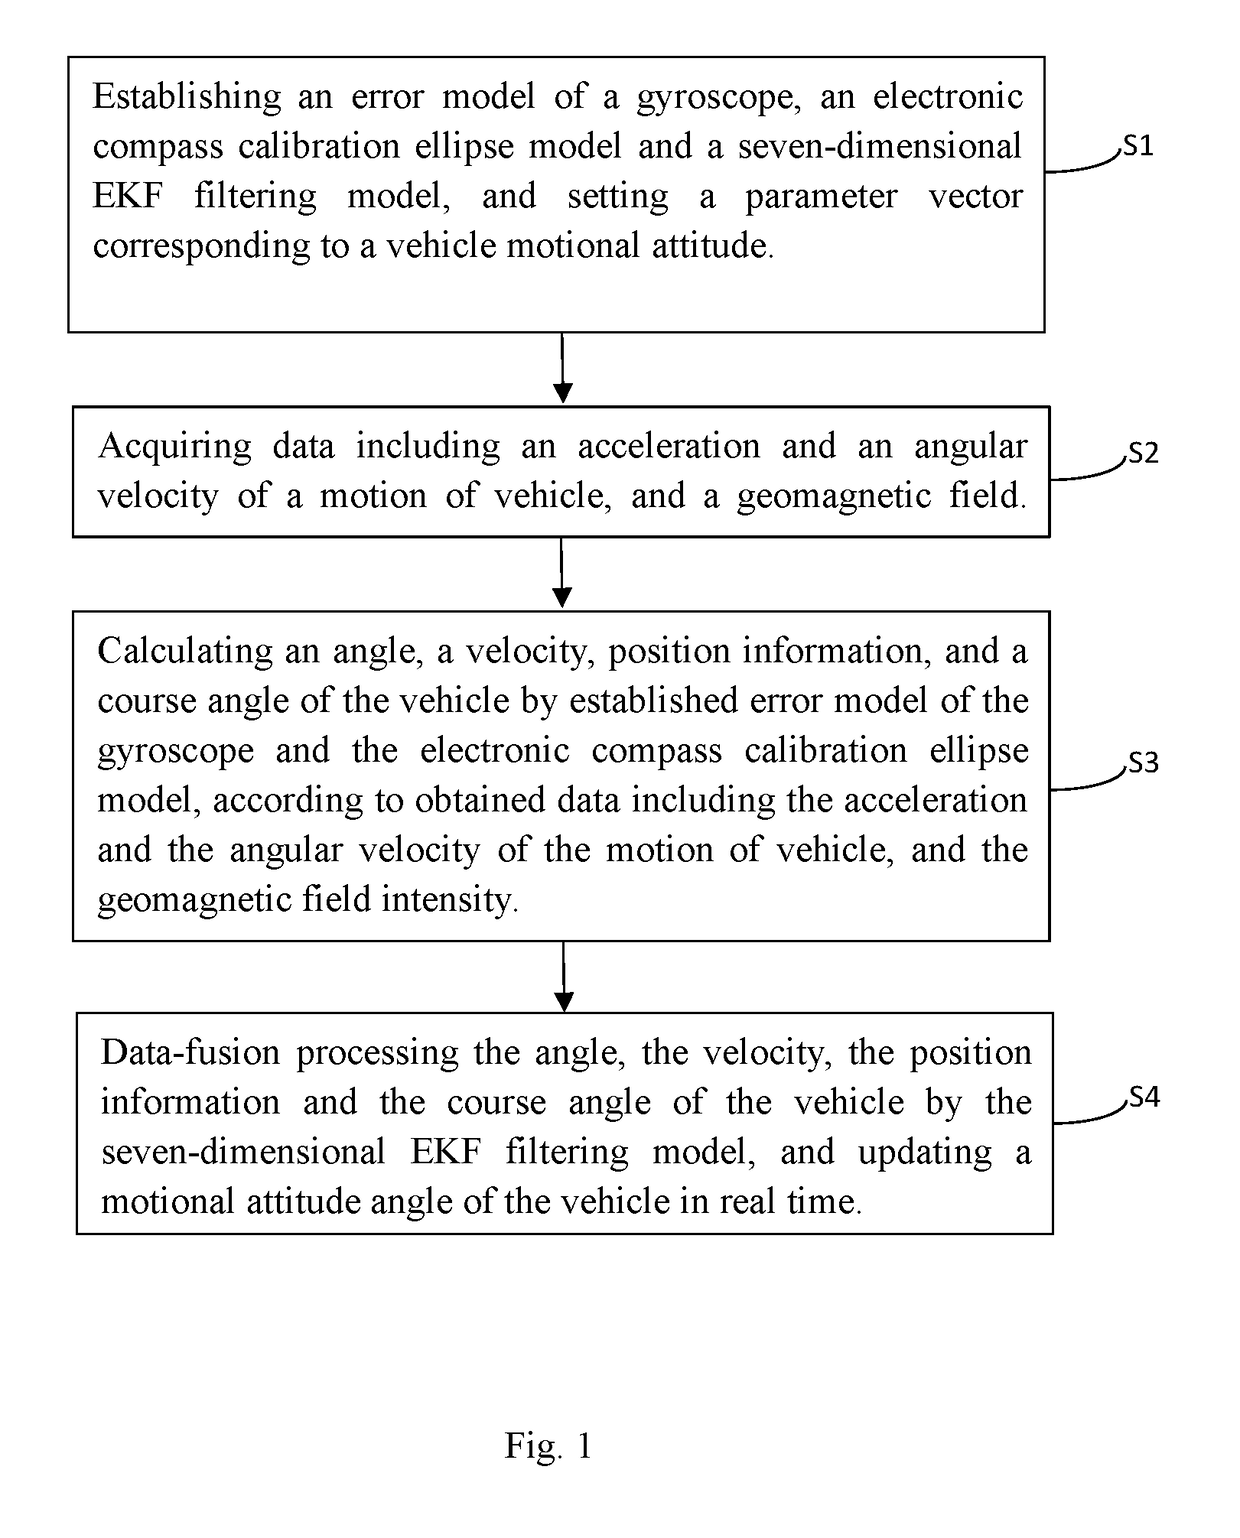 Method of Updating All-Attitude Angle of Agricultural Machine Based on Nine-Axis MEMS Sensor